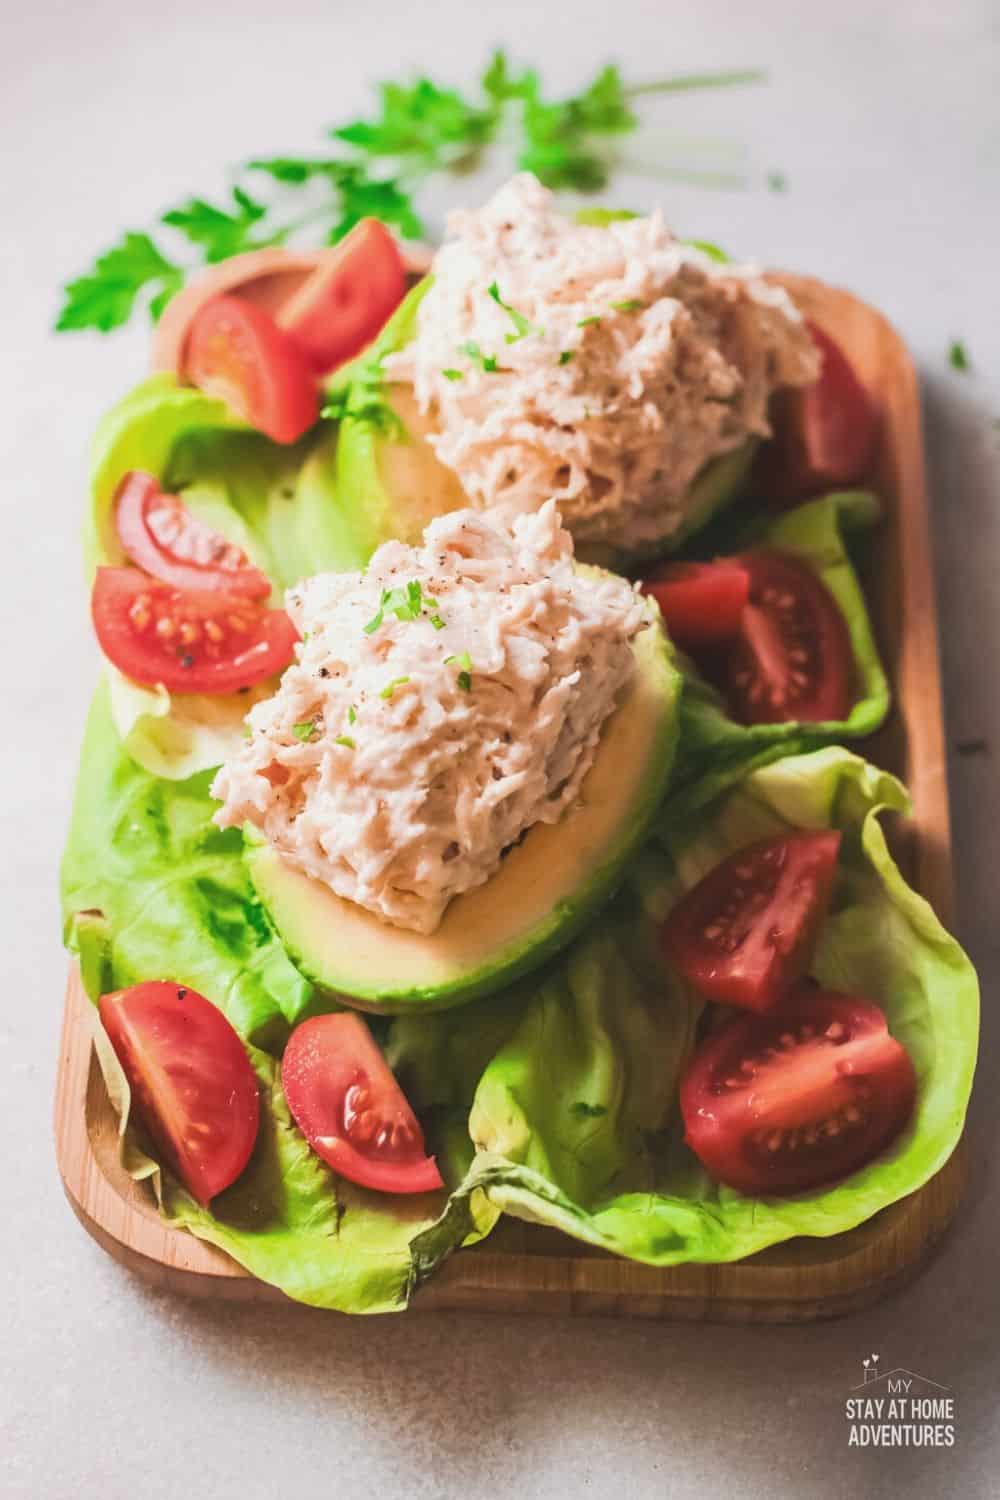 Stuffed avocados are delicious. Learn how to create simple to make stuffed avocados made with chicken breast. #avocadorecipe #stuffedavocado via @mystayathome